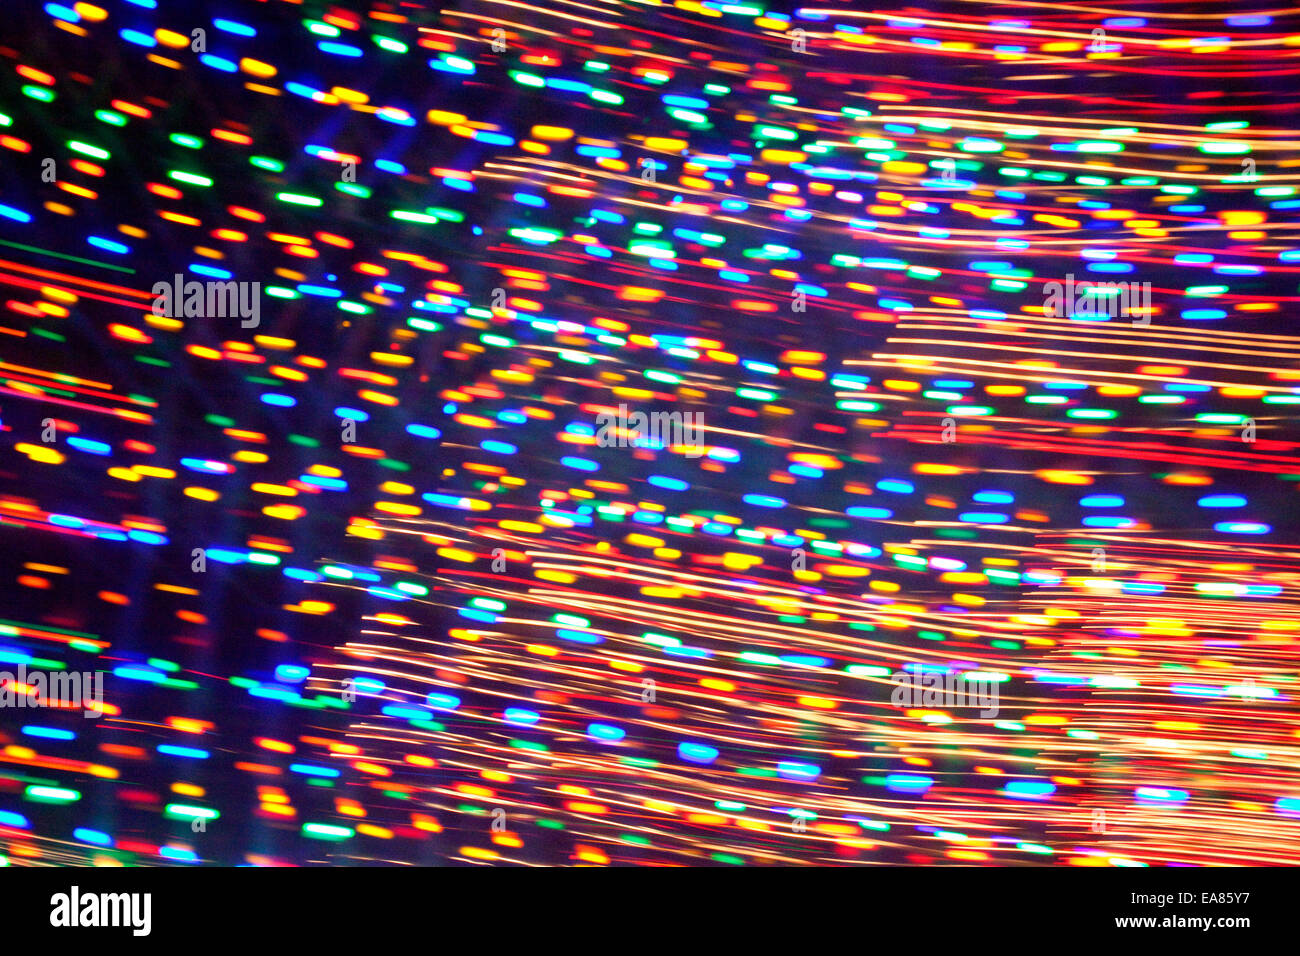 Streak of colored lights from Christmas Holiday Lights. Stock Photo